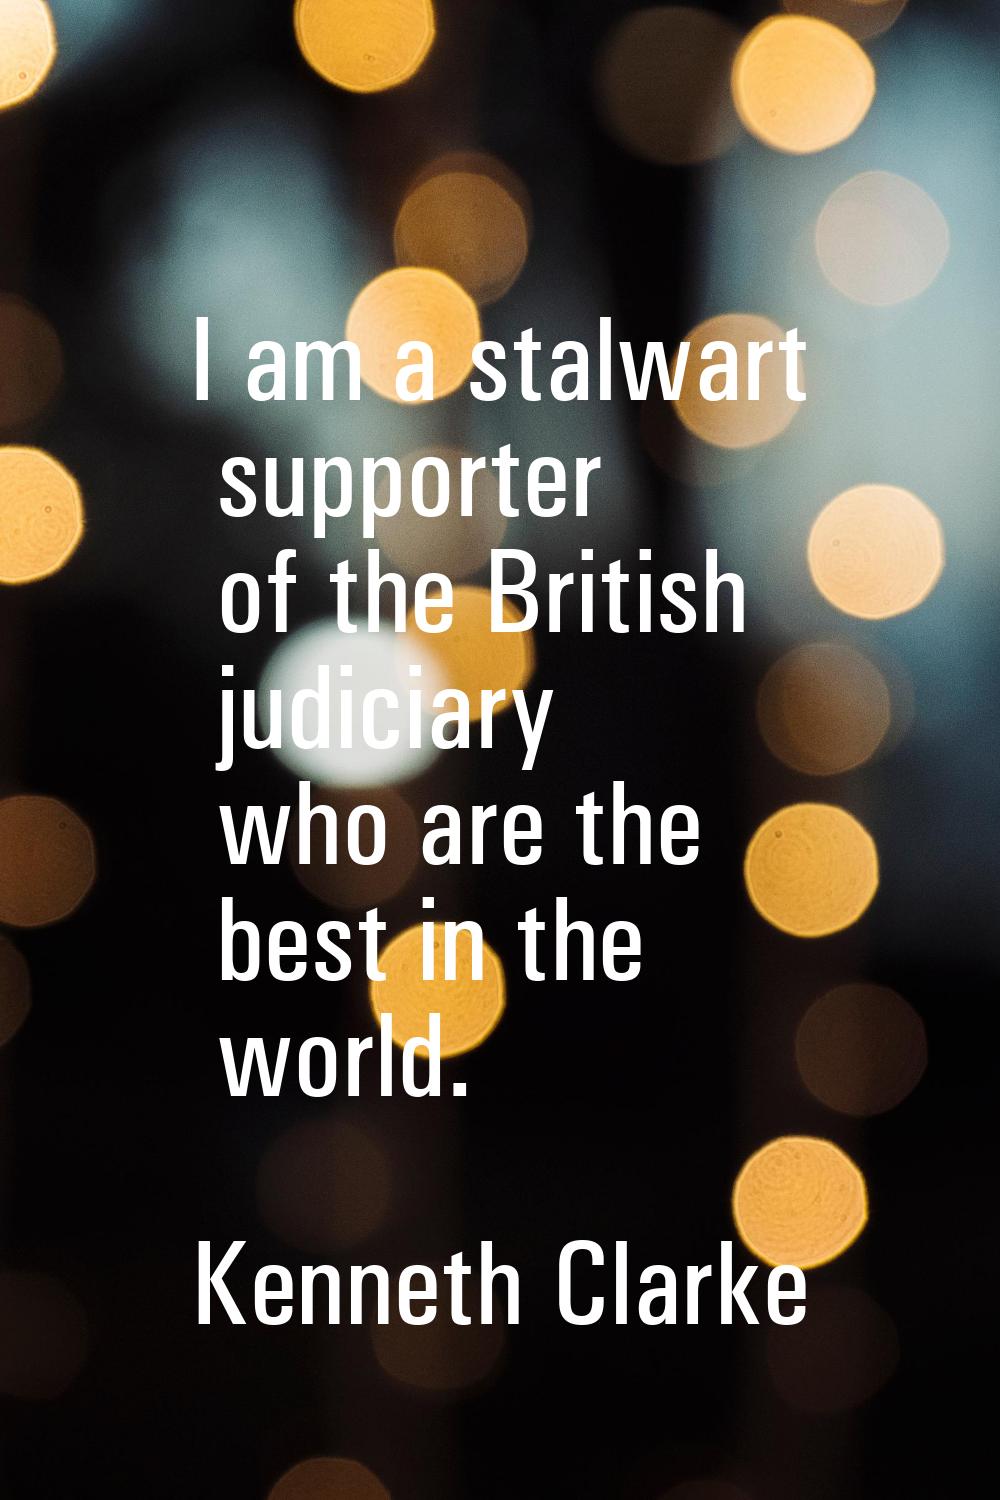 I am a stalwart supporter of the British judiciary who are the best in the world.